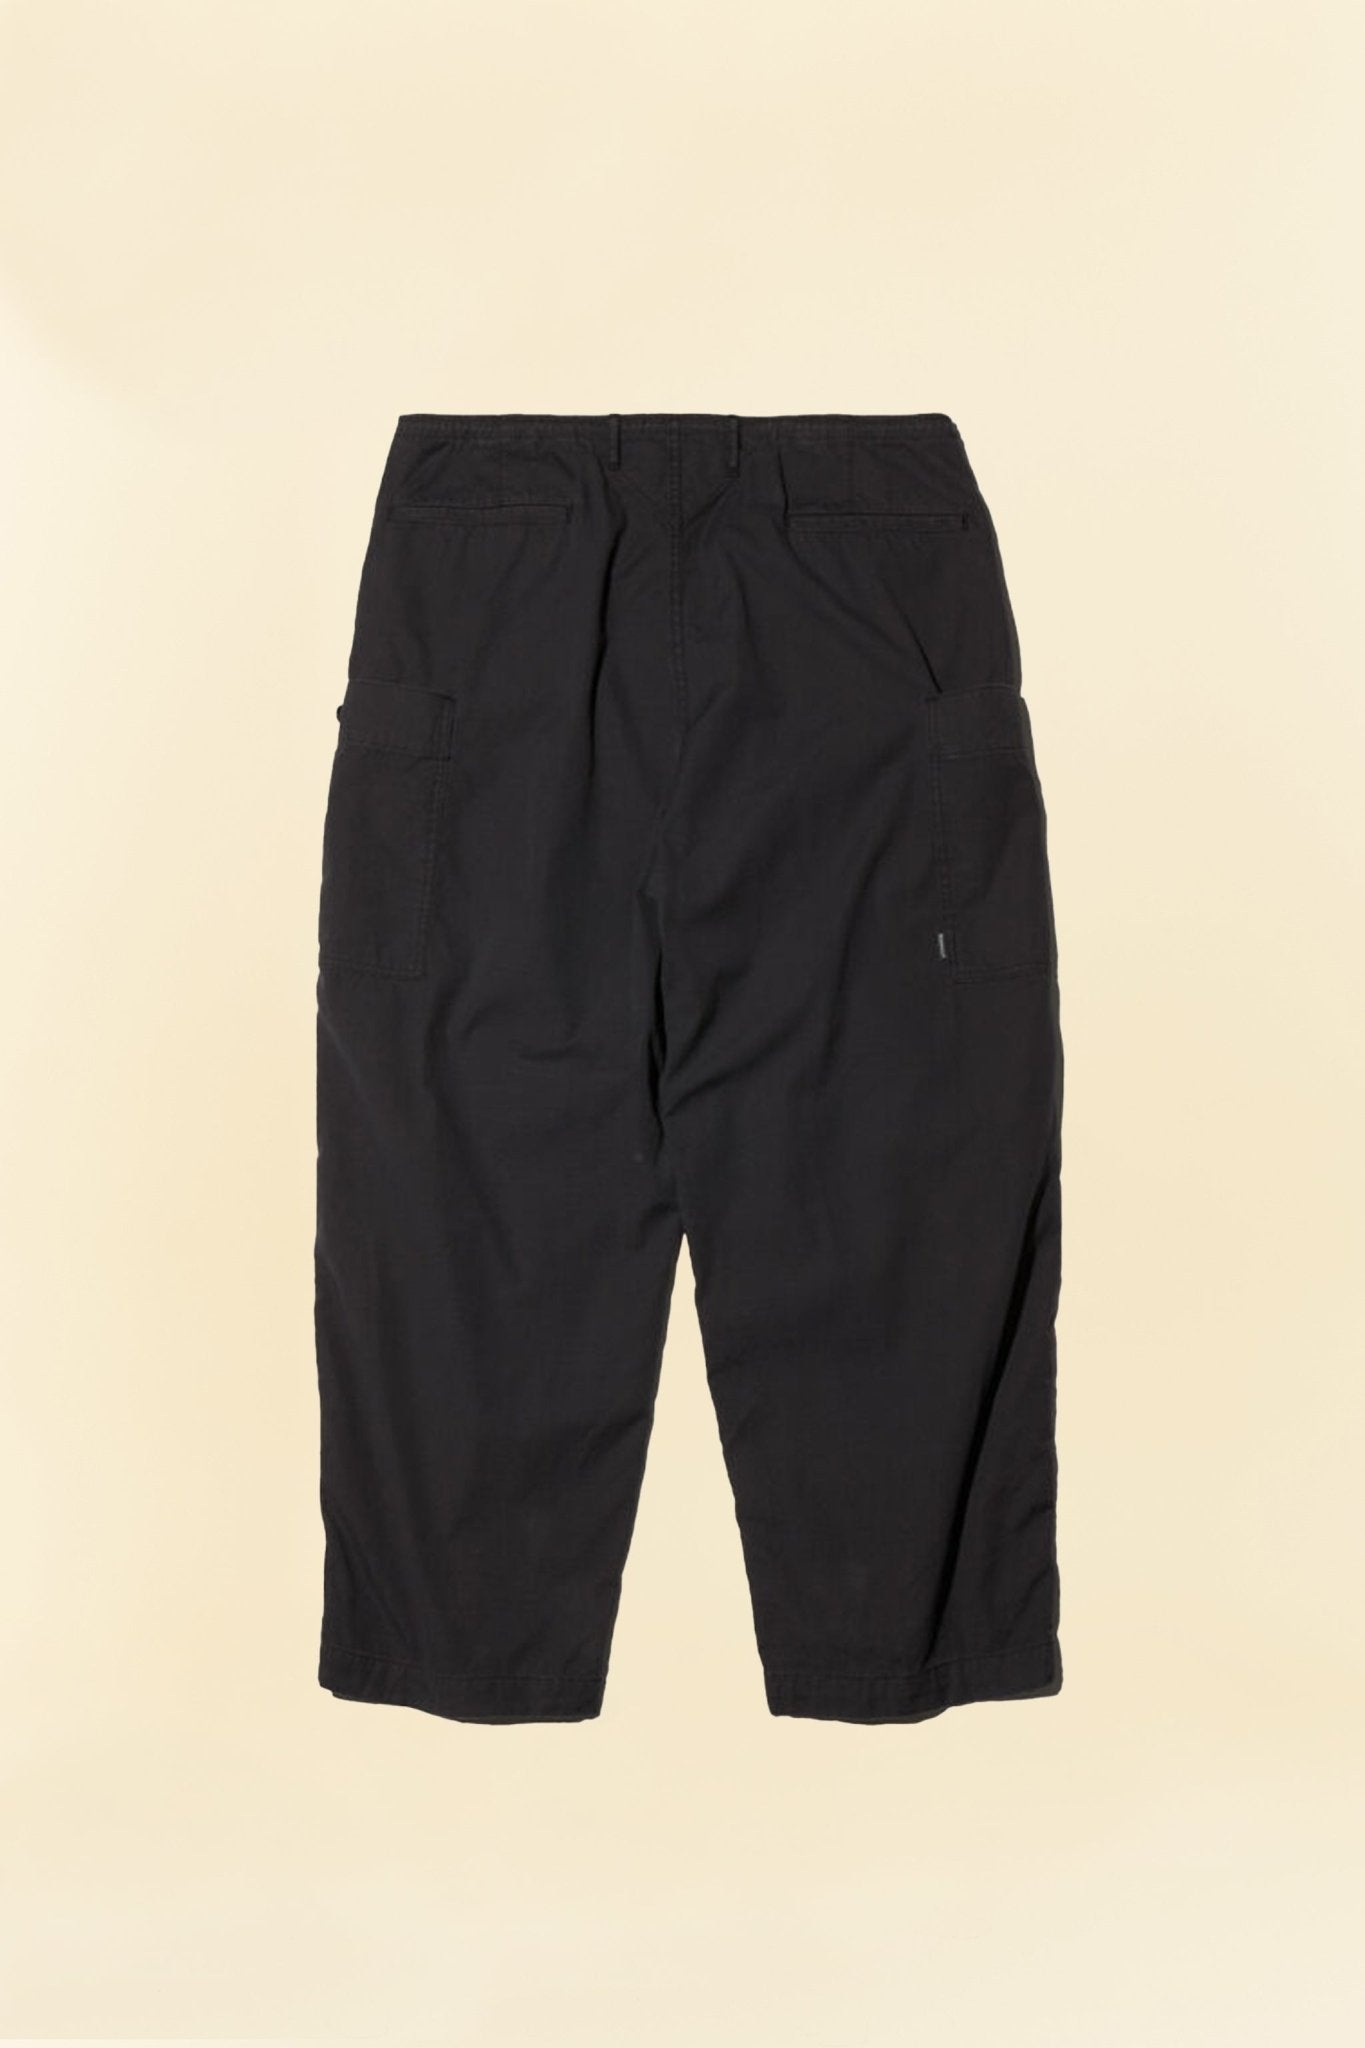 Radiall Clan Wide Fit Cargo Pants - Black -Radiall - URAHARA